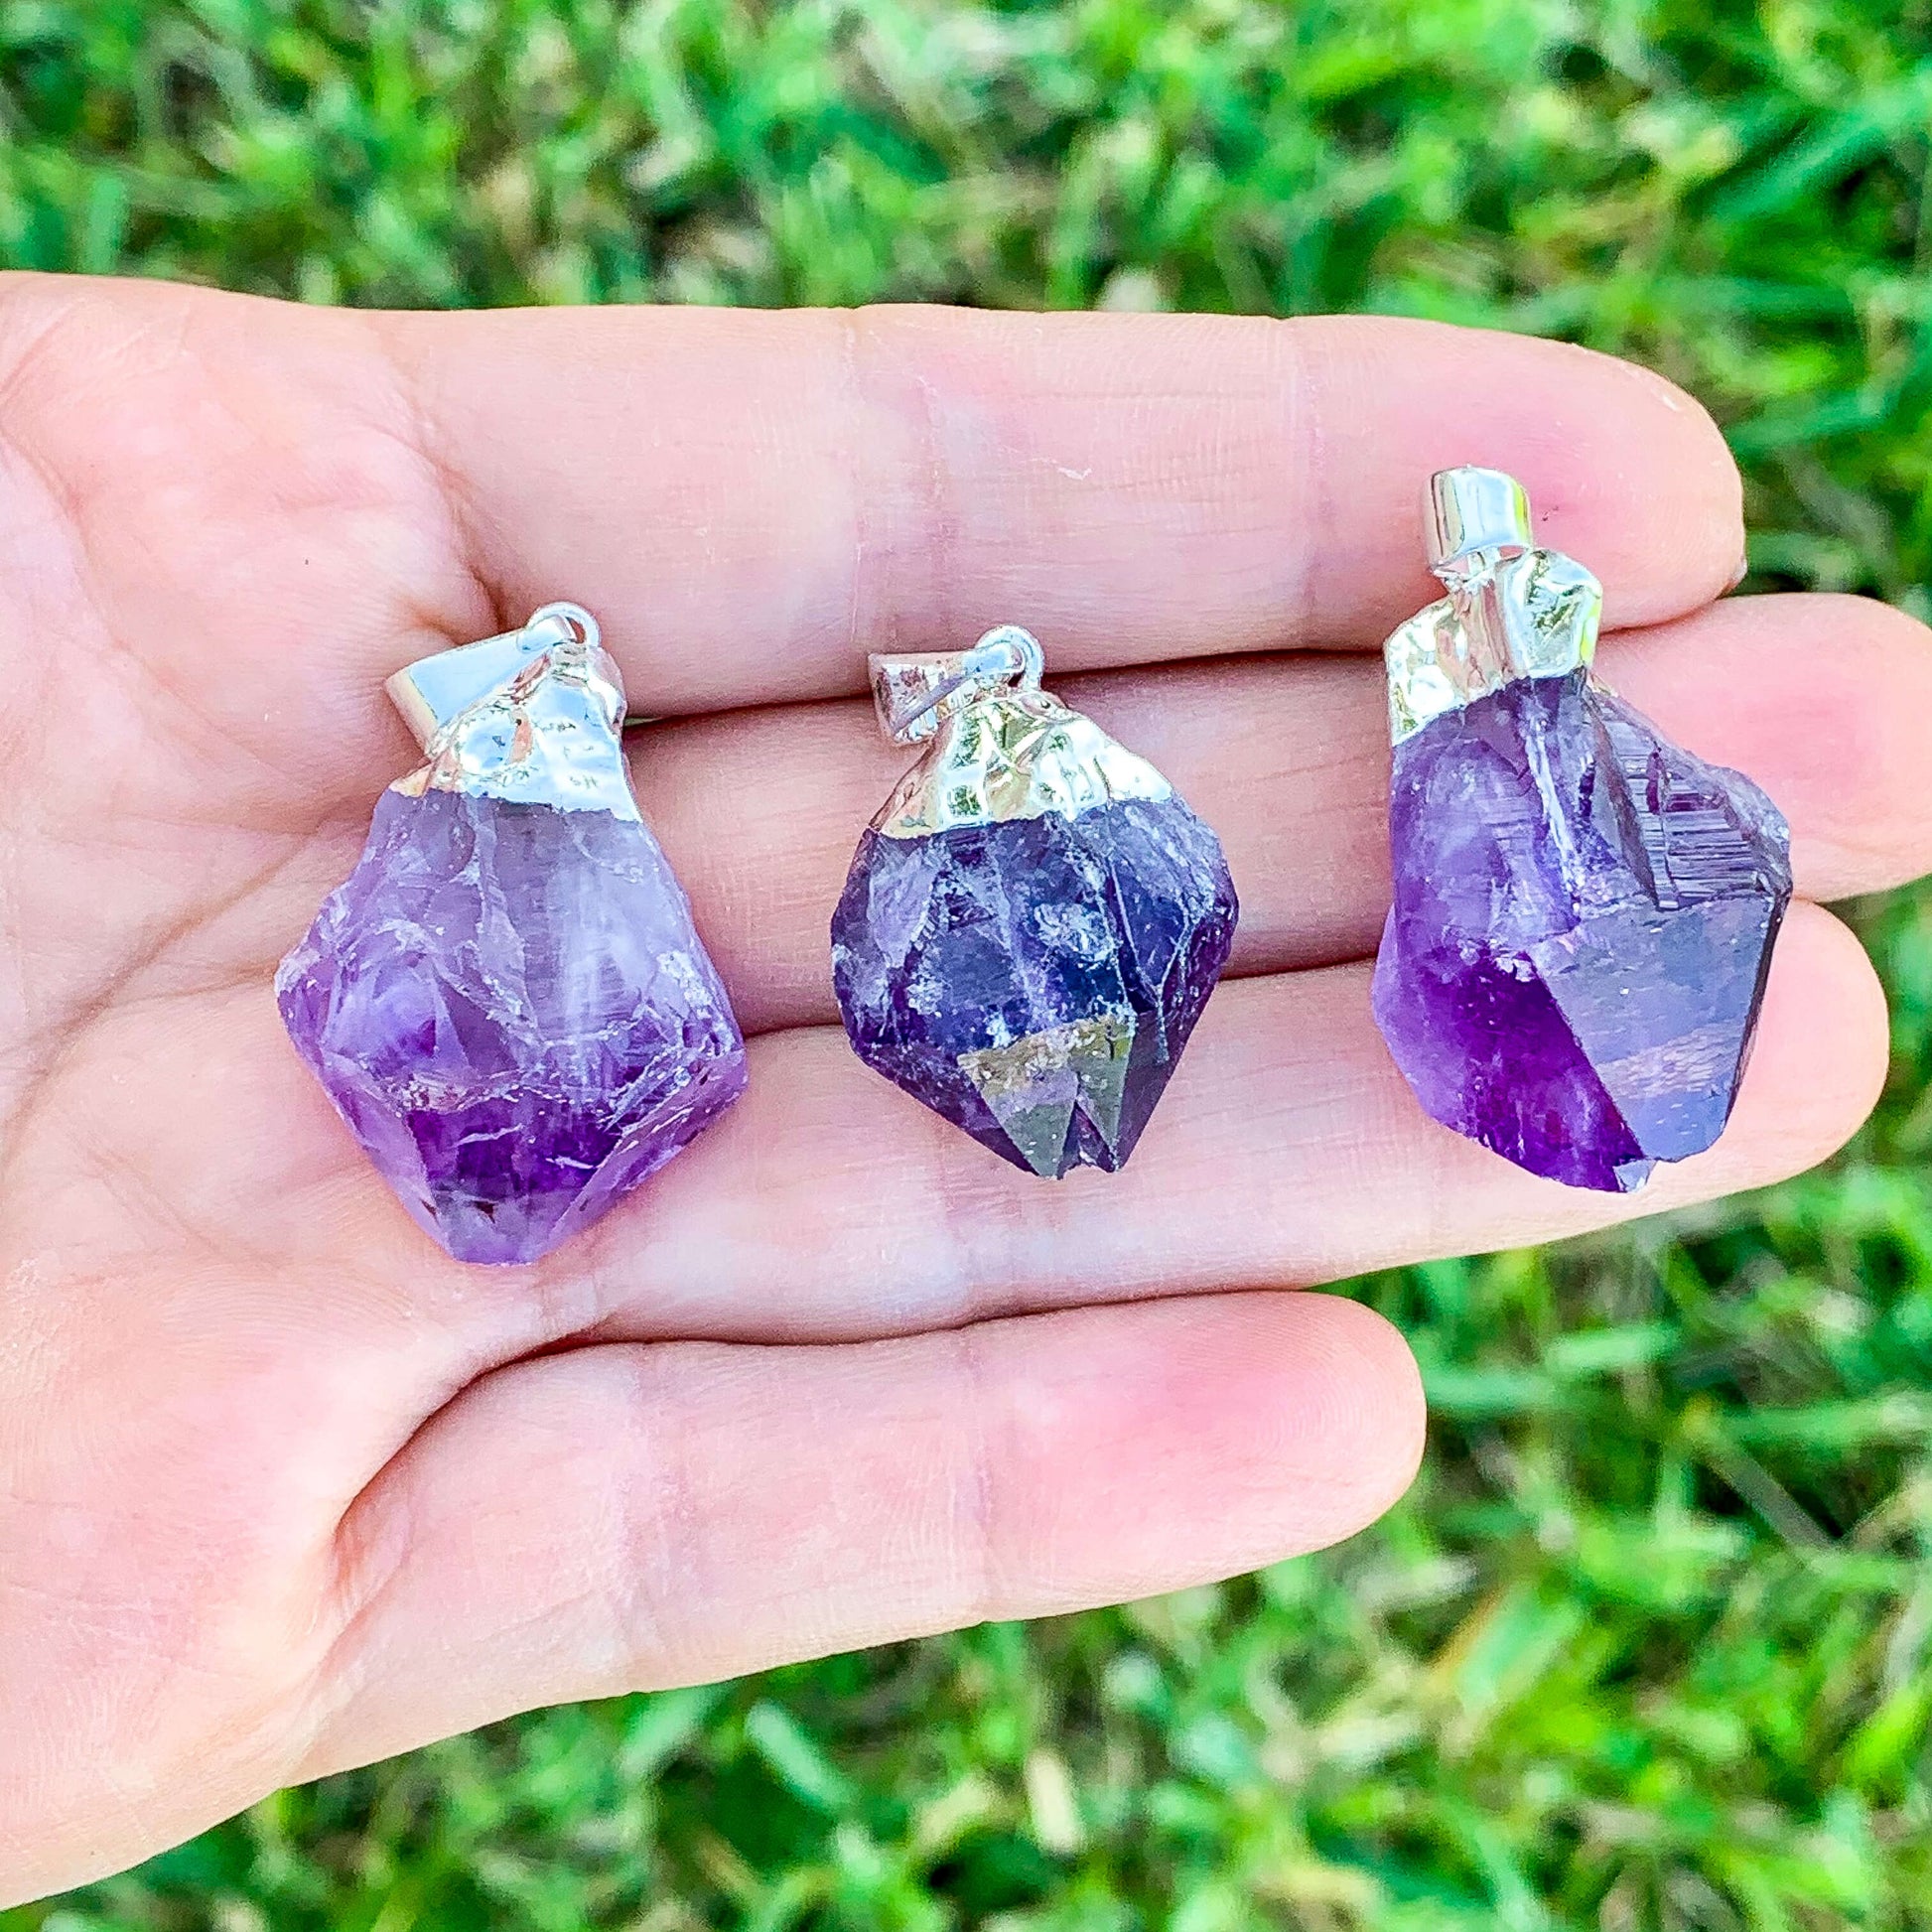 Raw Amethyst Pendant Amethyst necklace Healing - Magic Crystals - Stone Necklace